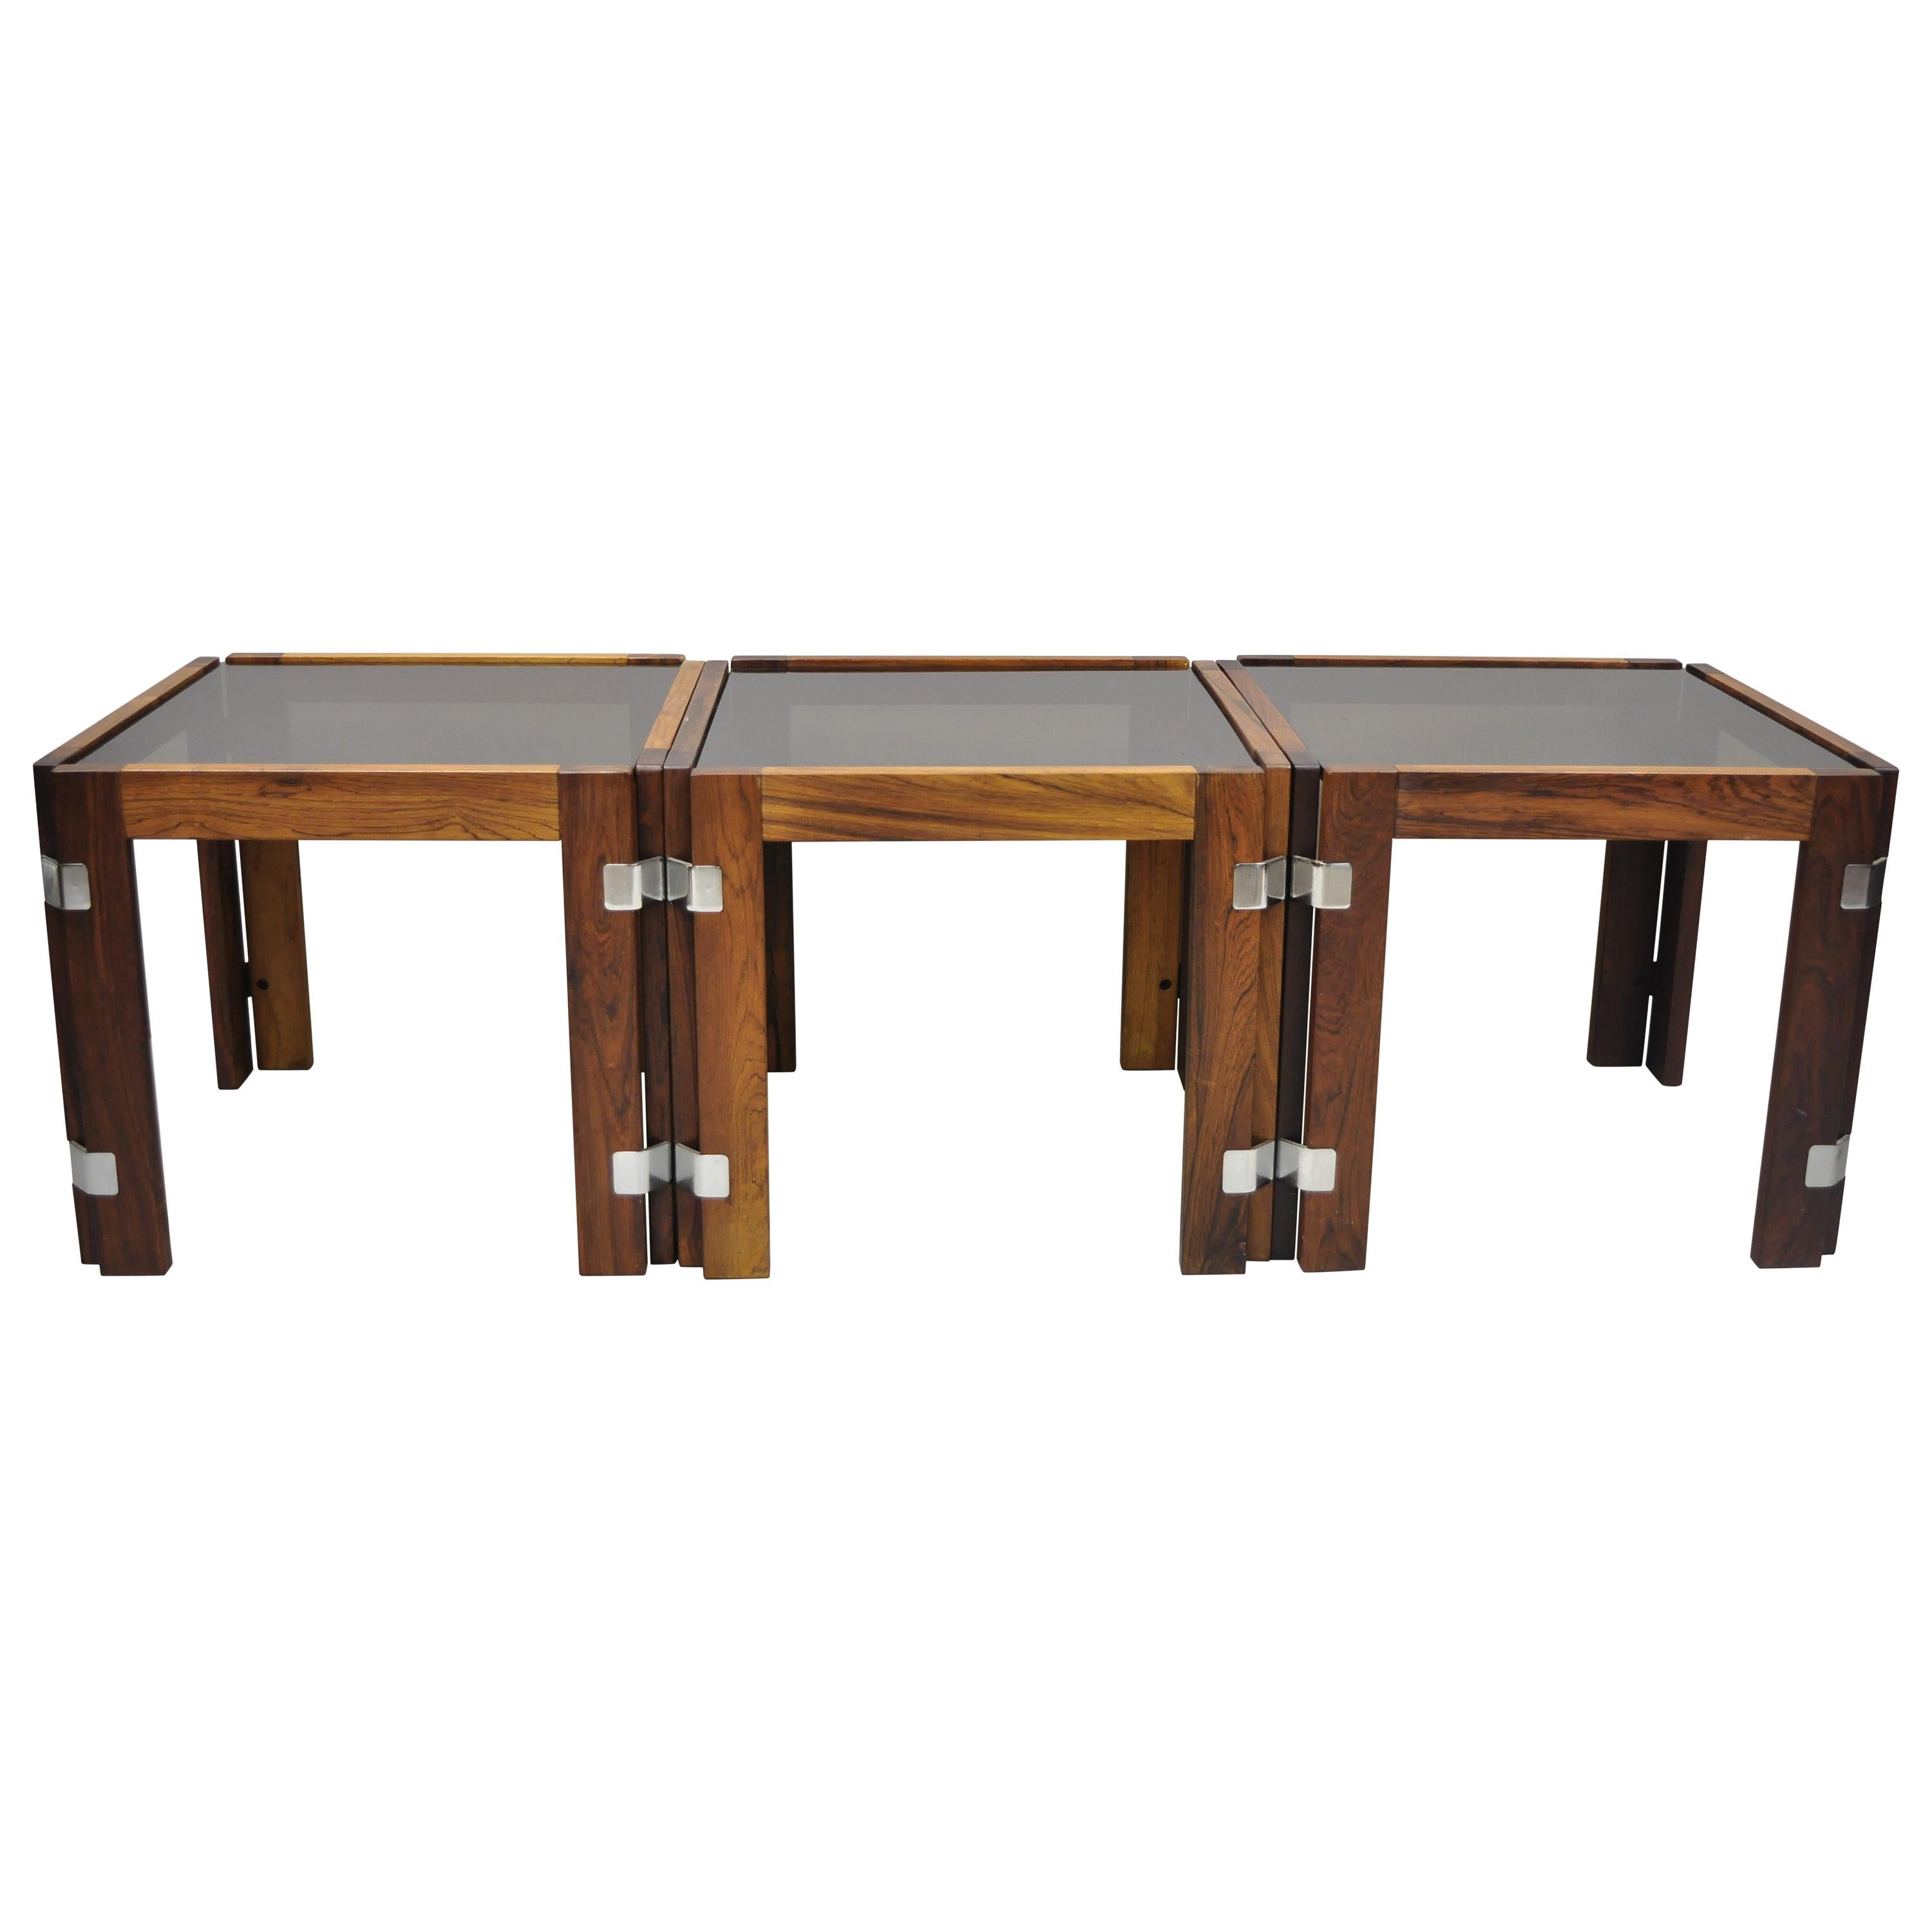 3 Midcentury Danish Modern Rosewood & Smoked Glass Side Tables by Interior Form For Sale